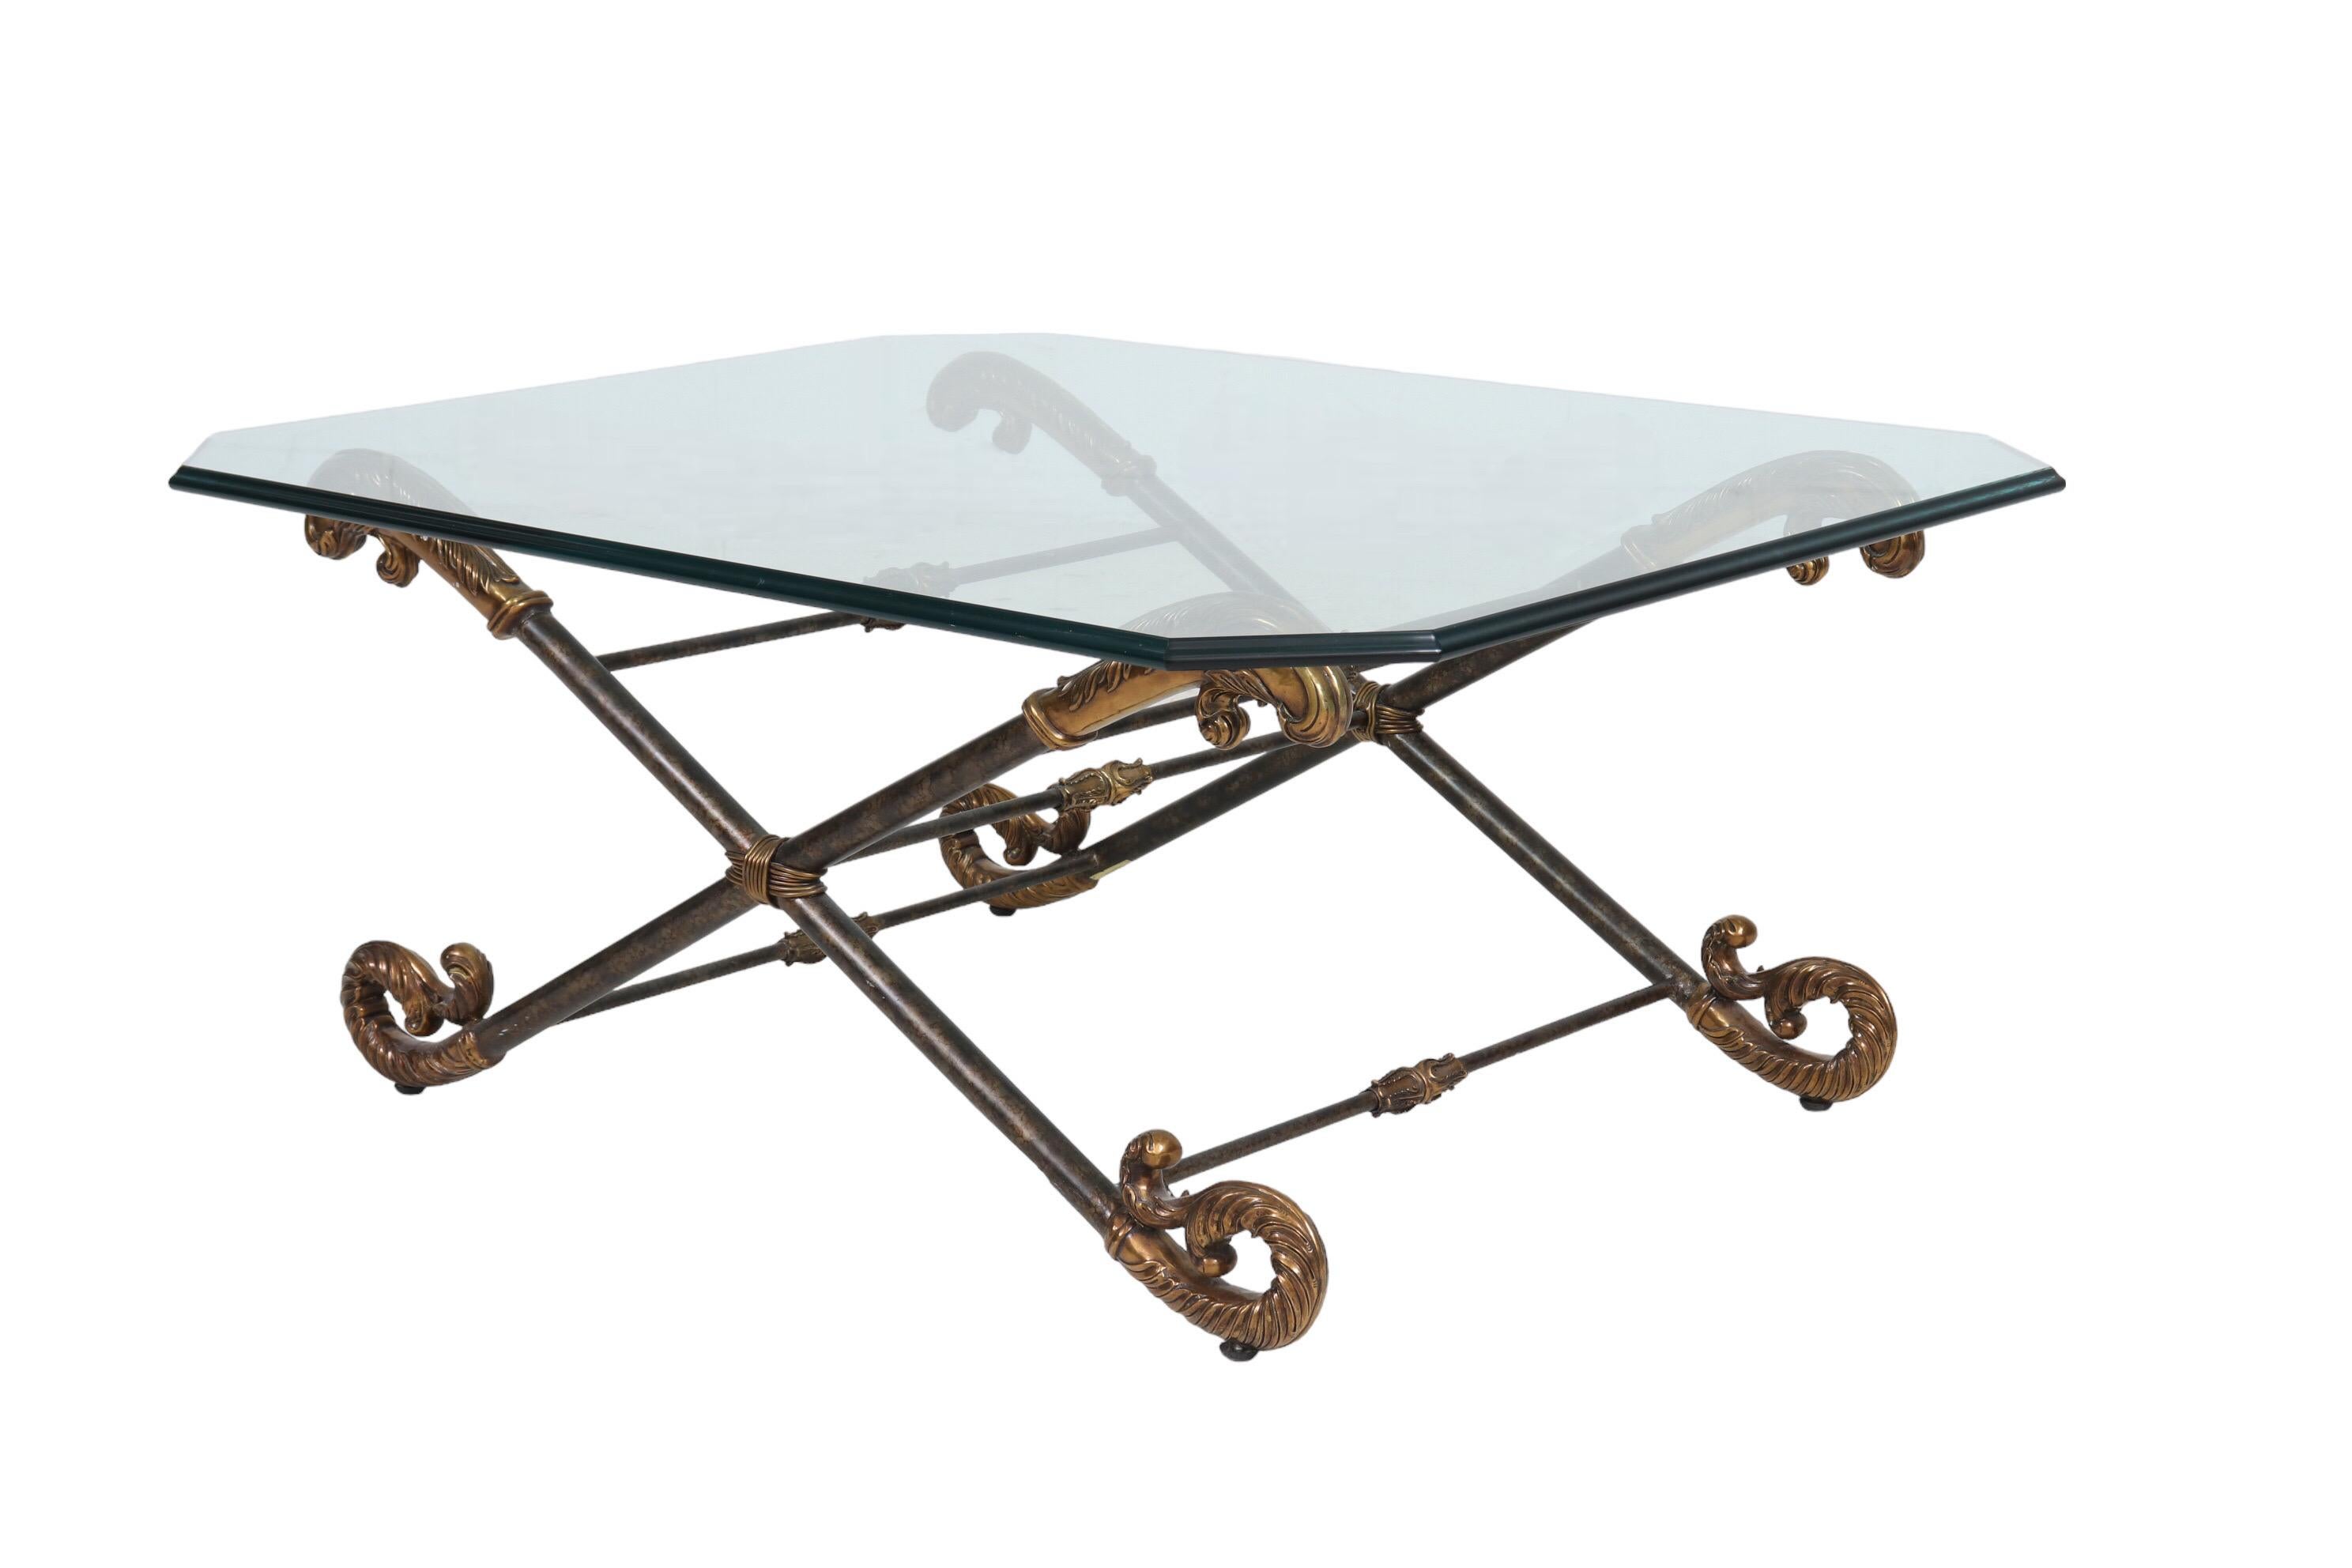 A brass and glass cocktail or coffee table made by La Barge. A rectangular glass tabletop with cut corners and a deep beveled edge rests on a double X shaped base, which is connected with five support bars. The feet are decorated with s-scrolls cast